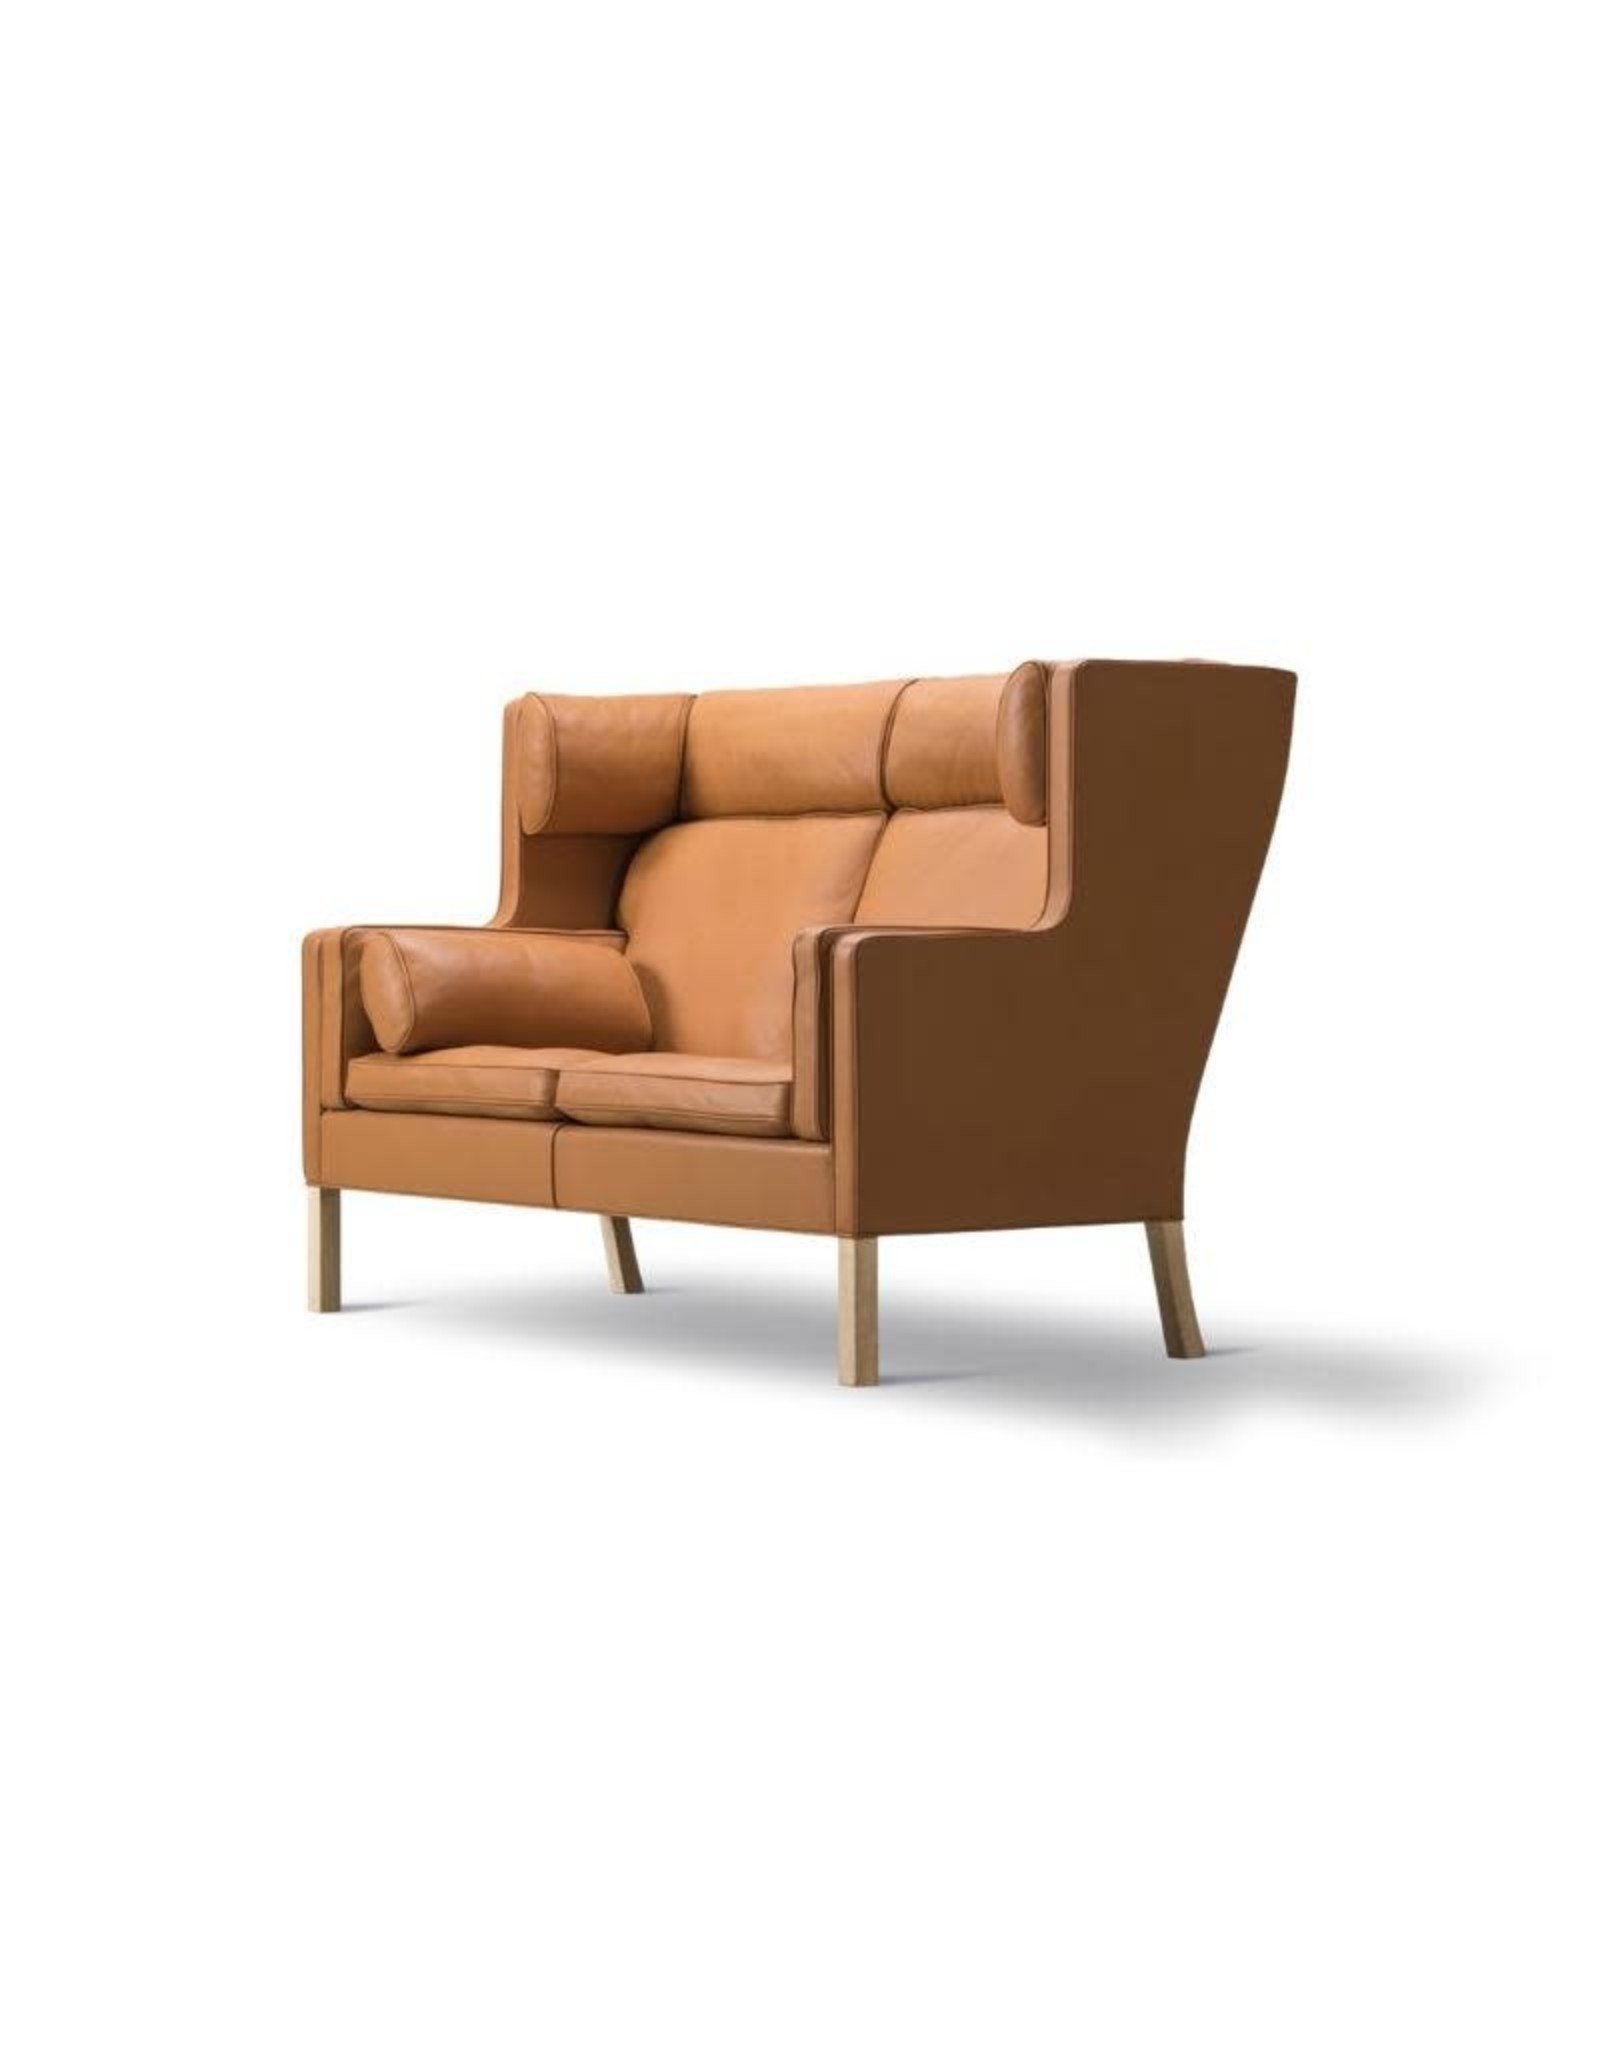 2292 MOGENSEN COUPE SOFA IN LEATHER